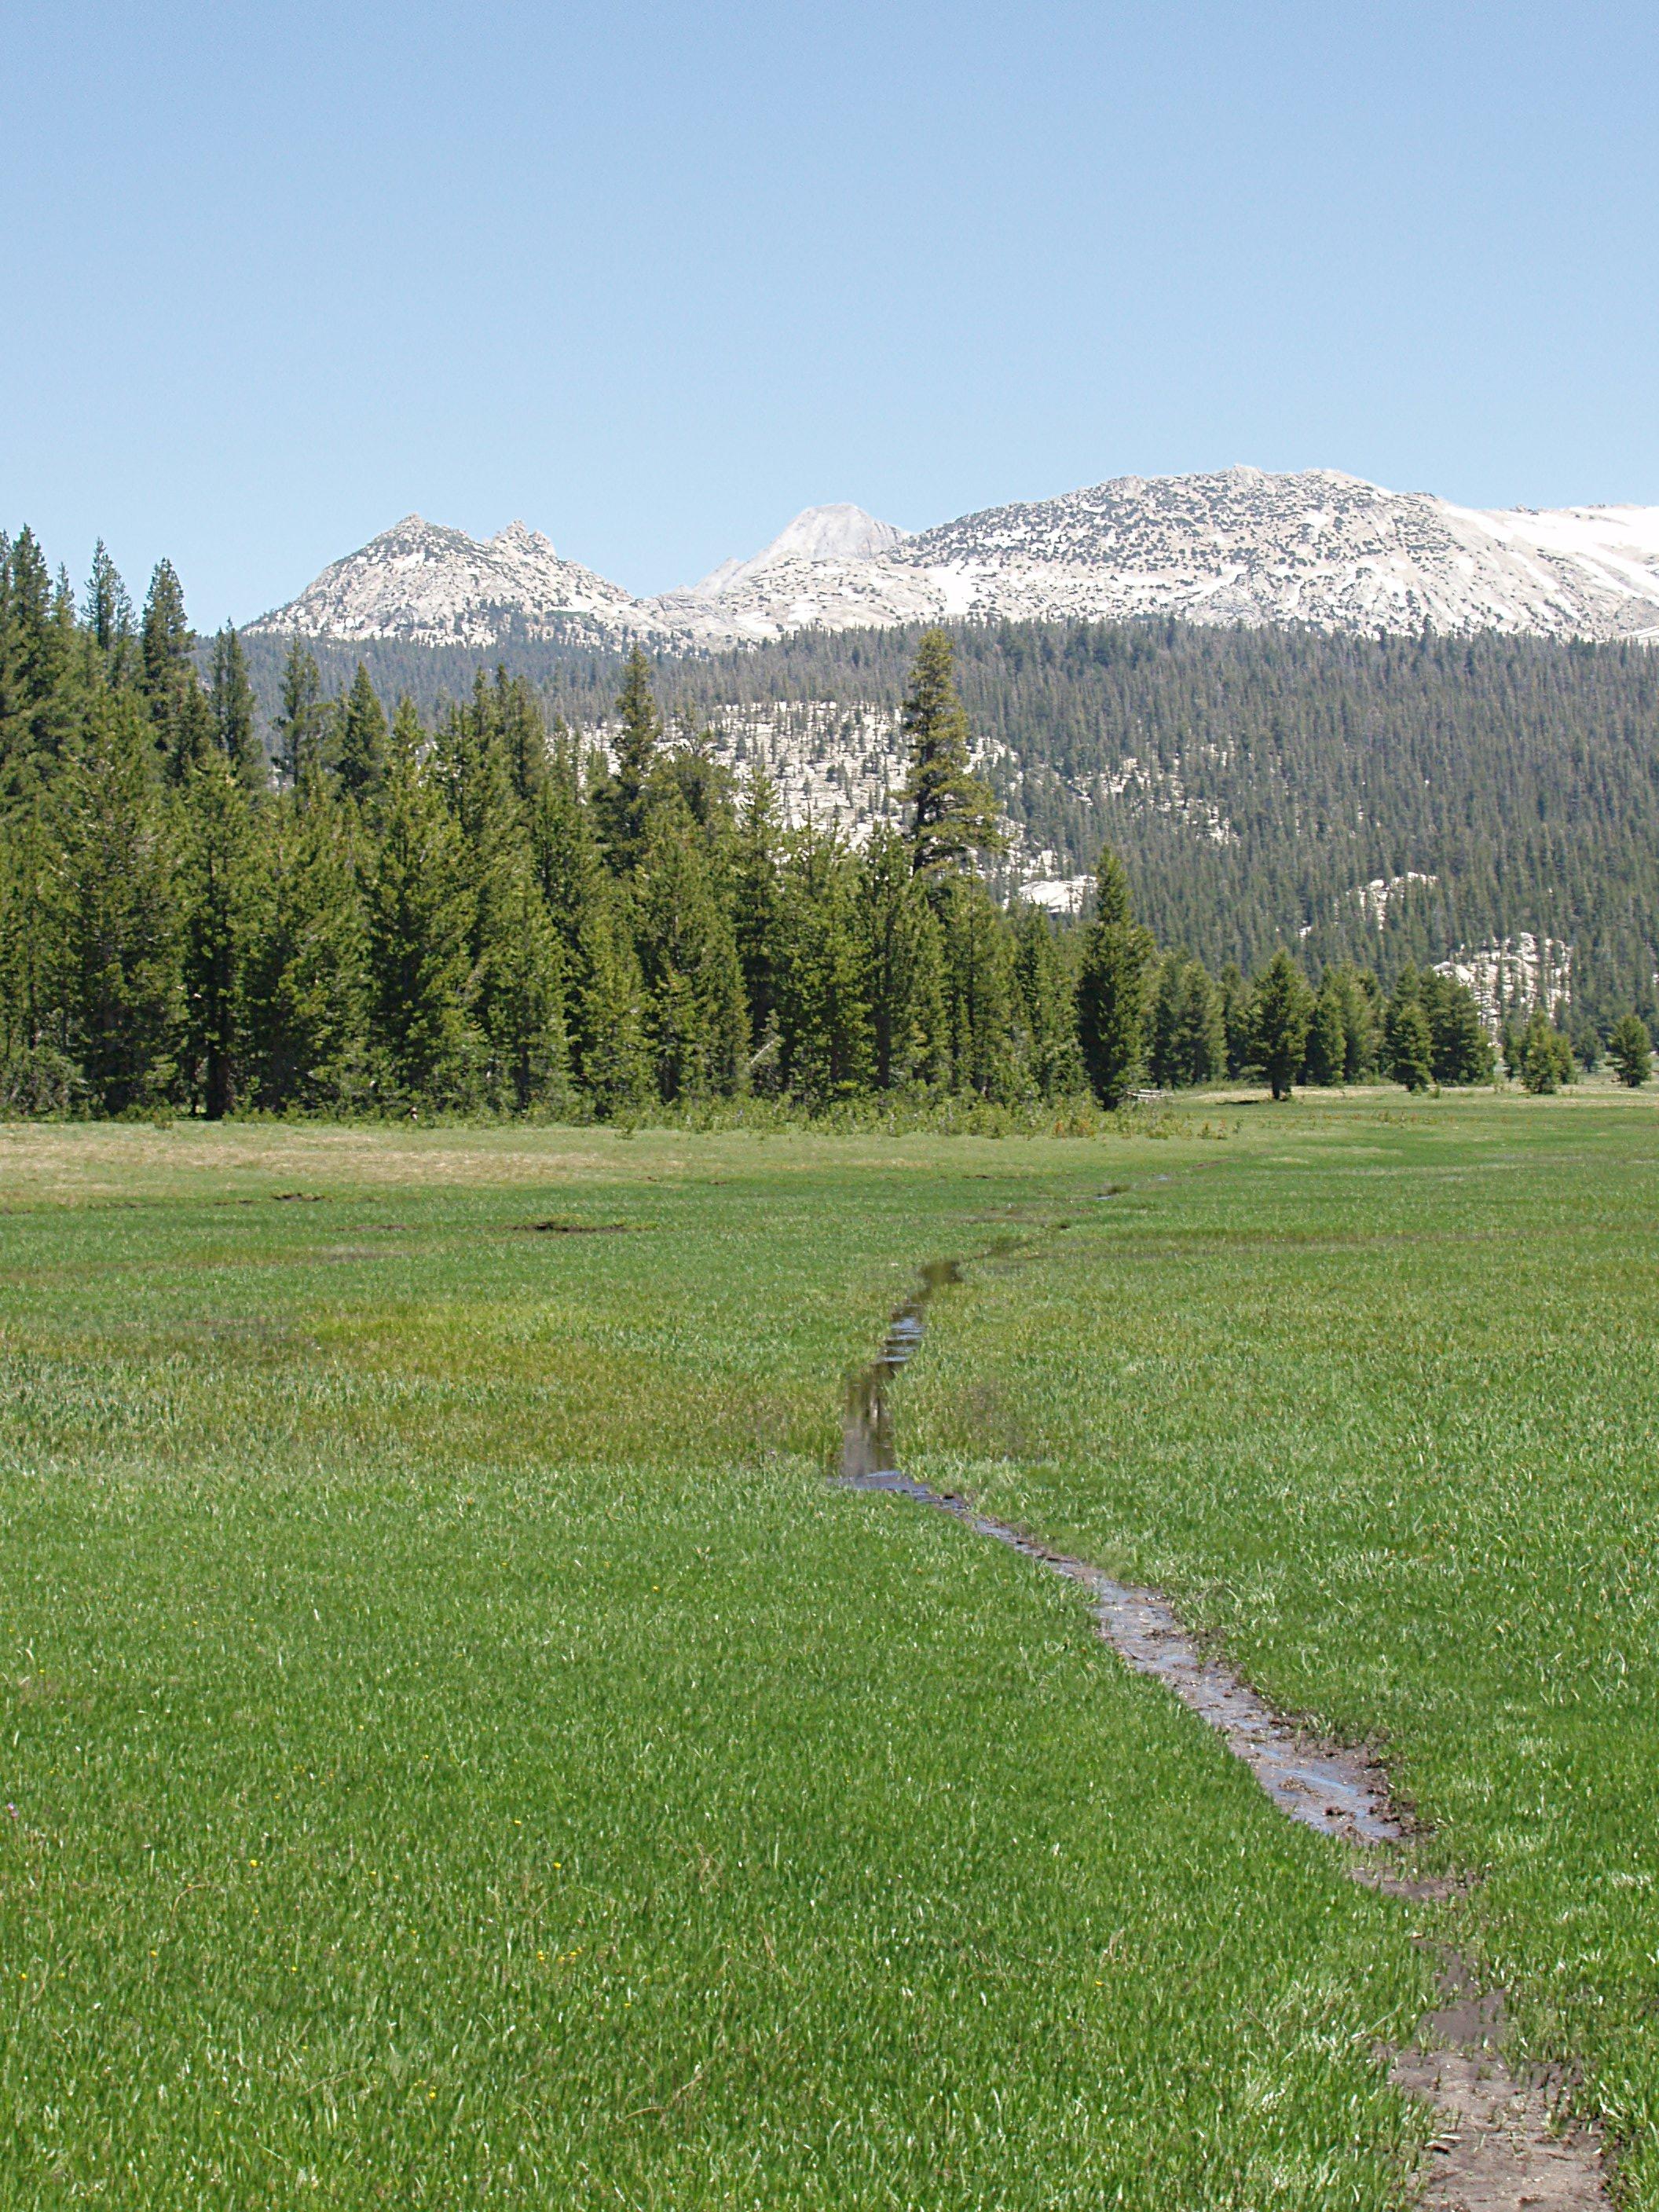 Wet Trail at Tuolumne Meadows in the Spring